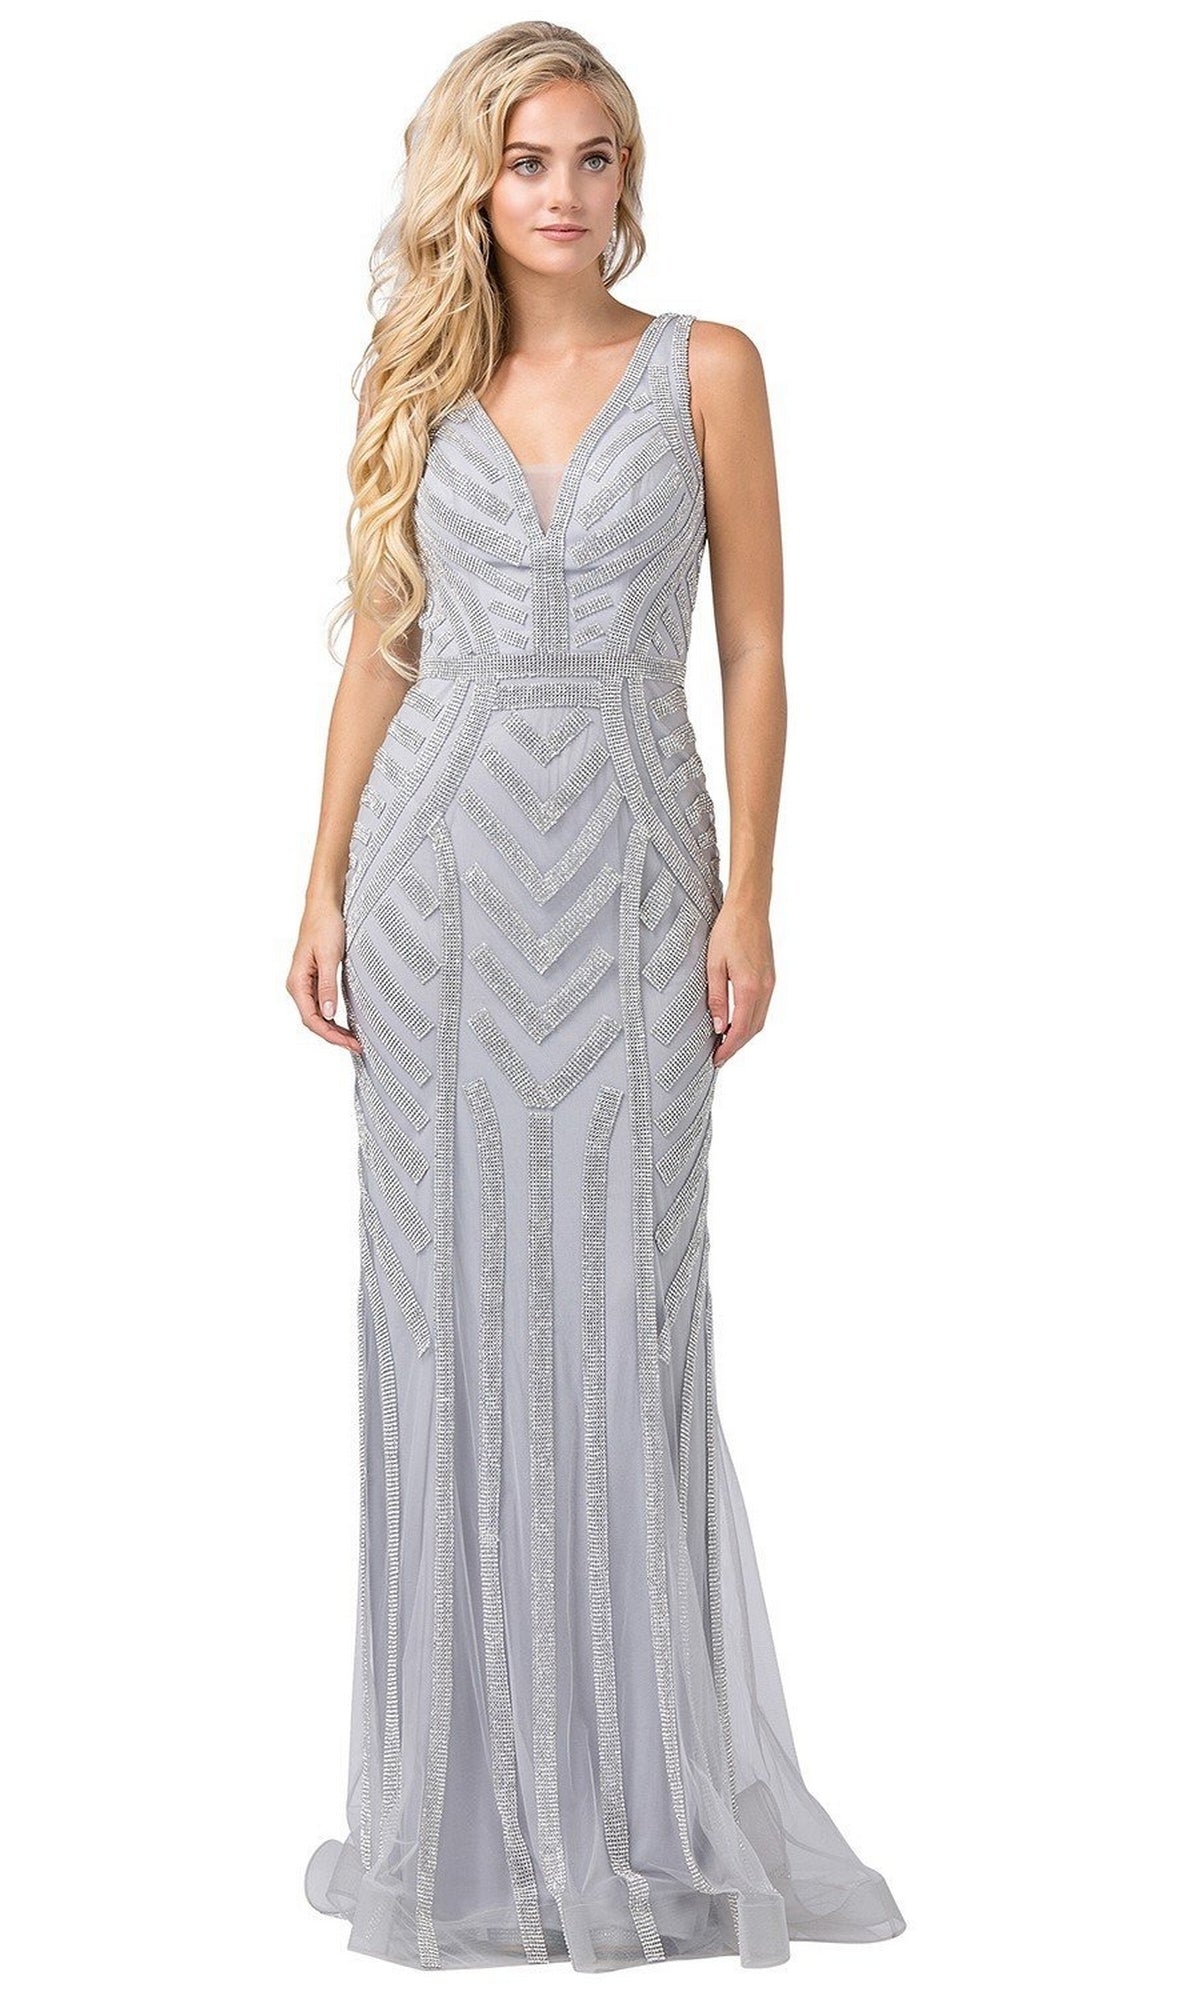 Silver/Silver Long Formal Dress with Beaded Stripes